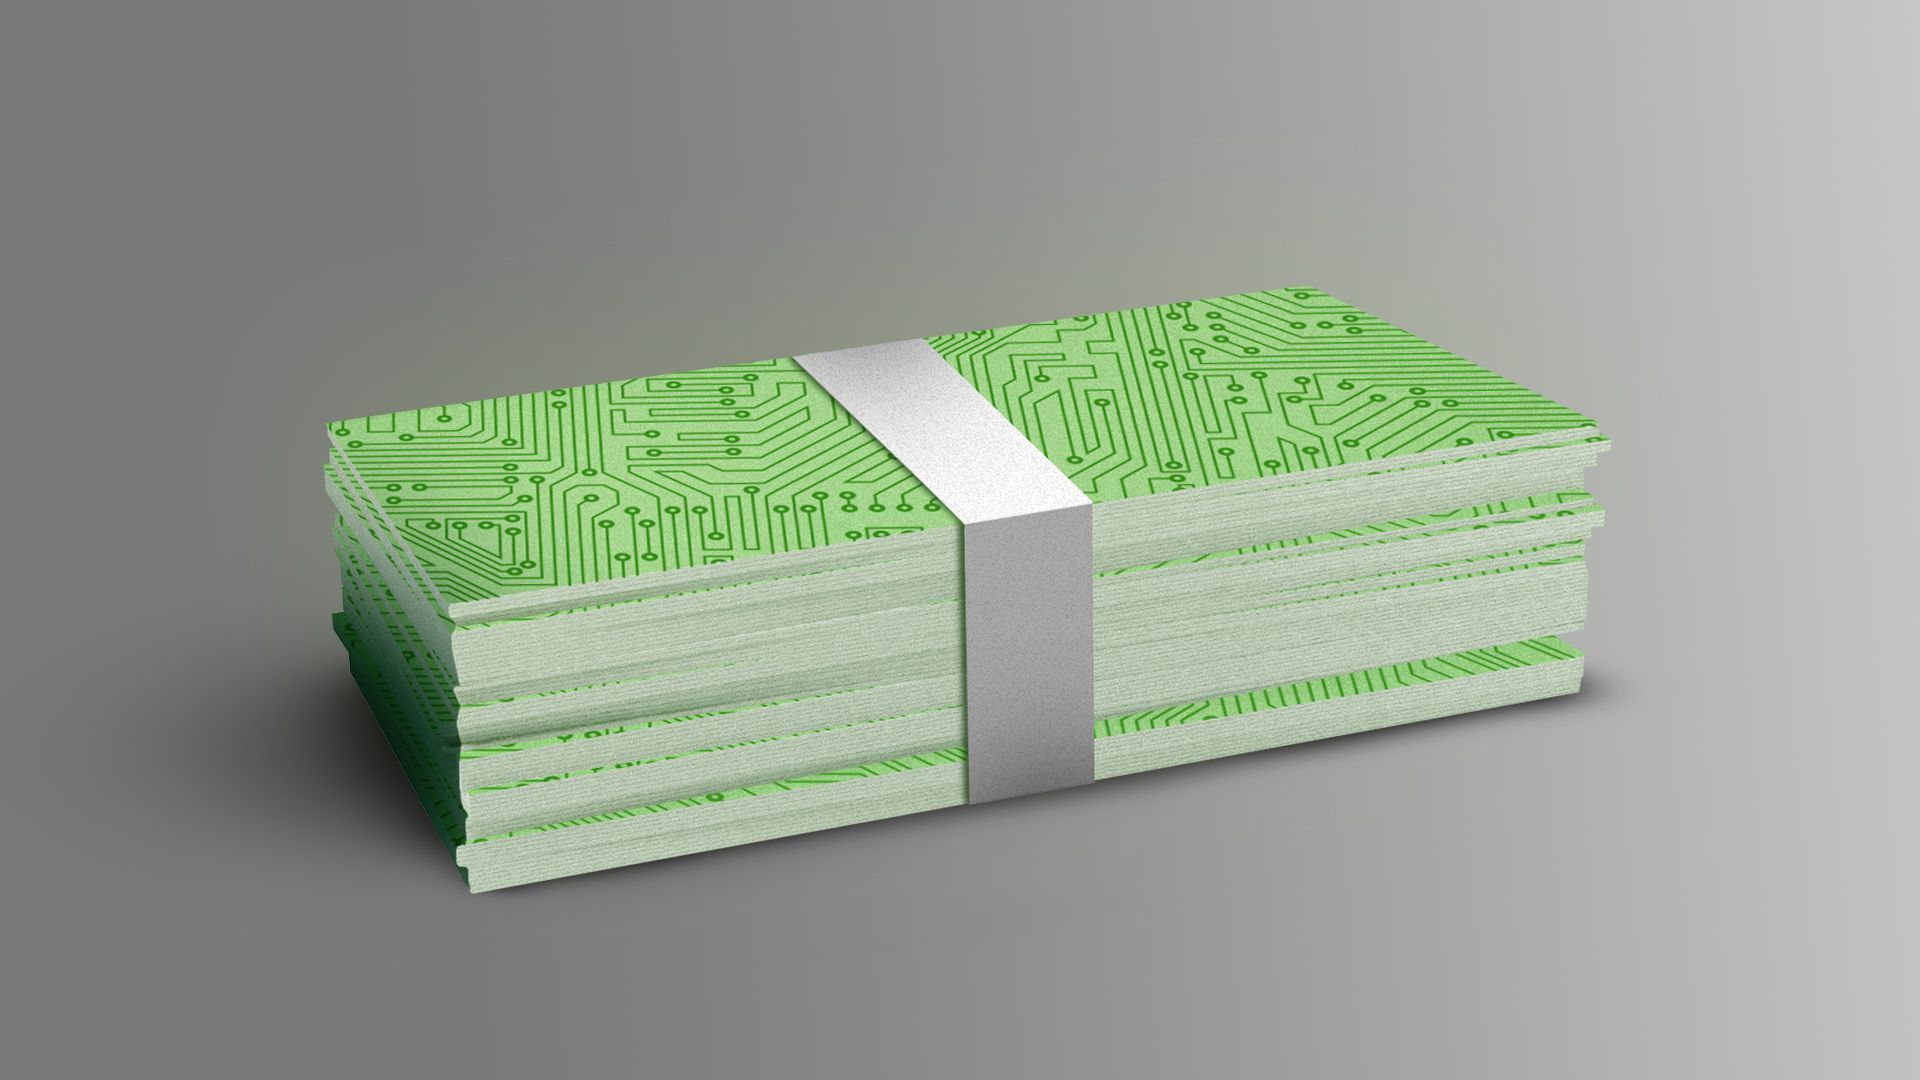 Illustration of a stack of bill panels with a circuit design on the front, a digital currency.